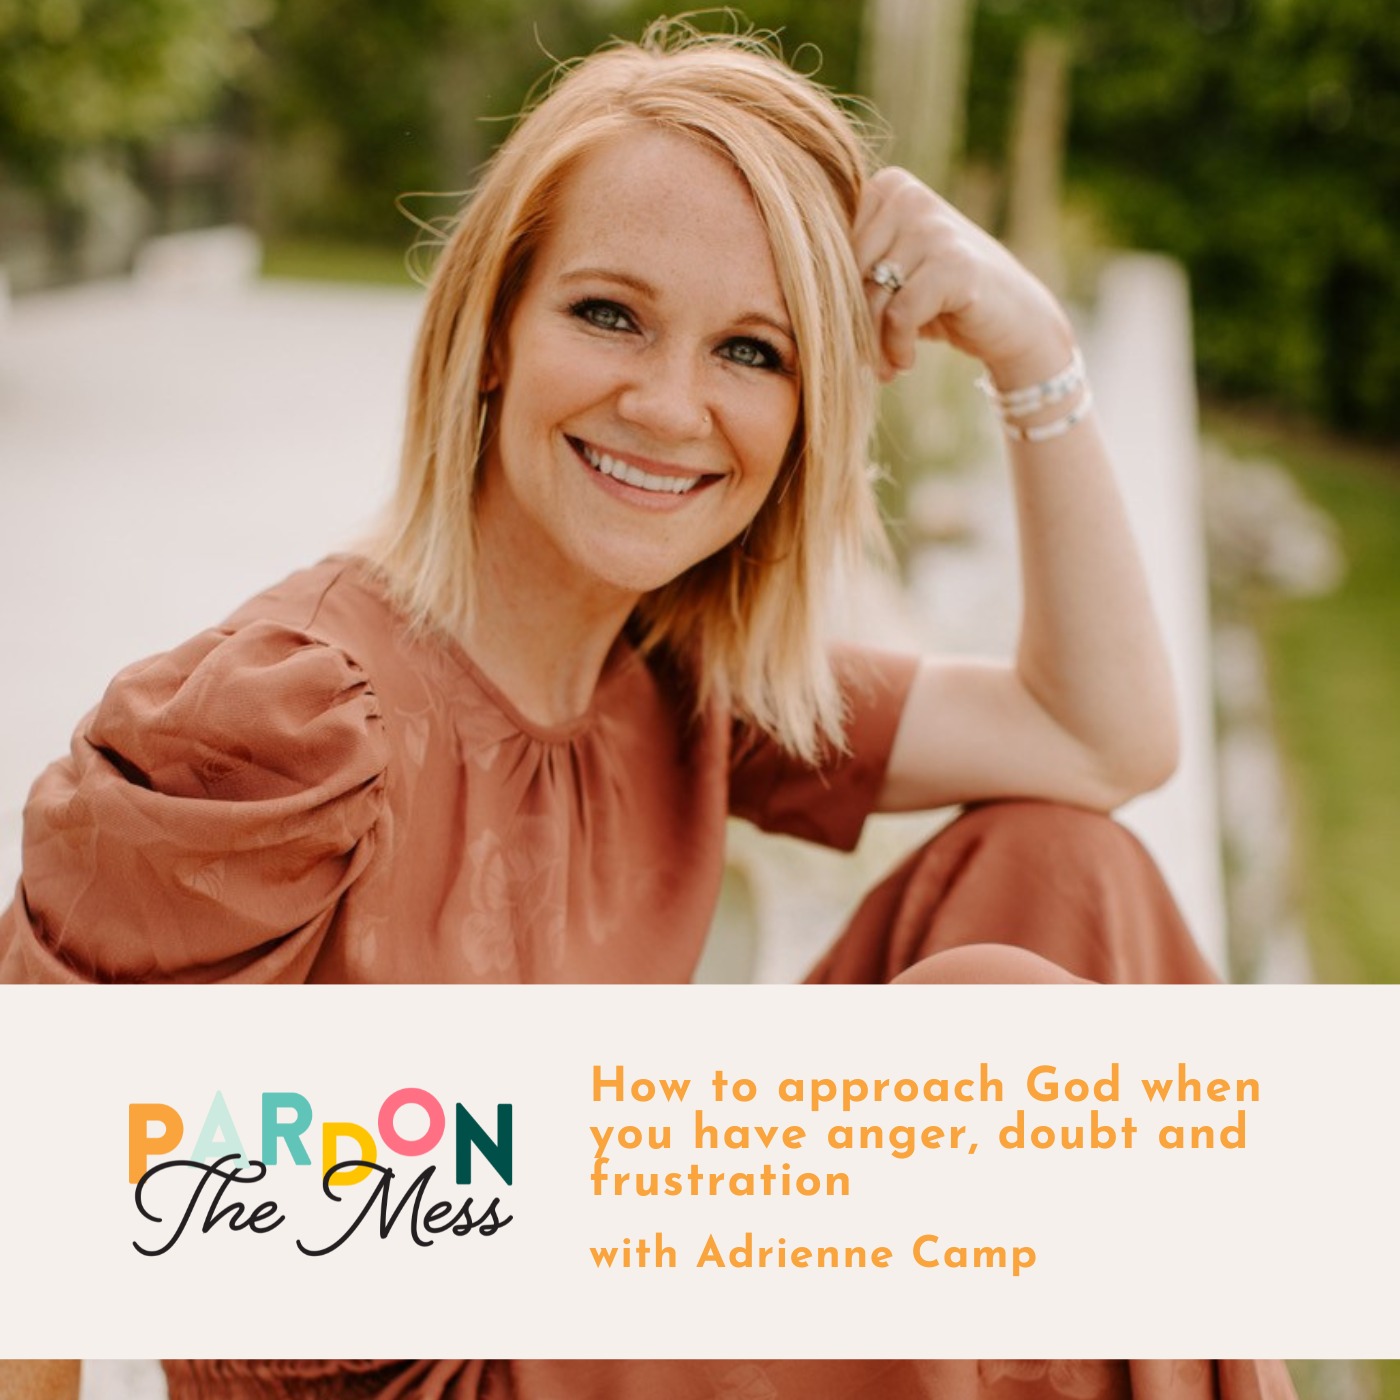 How to approach God when you have anger, doubt and frustration with Adrienne Camp